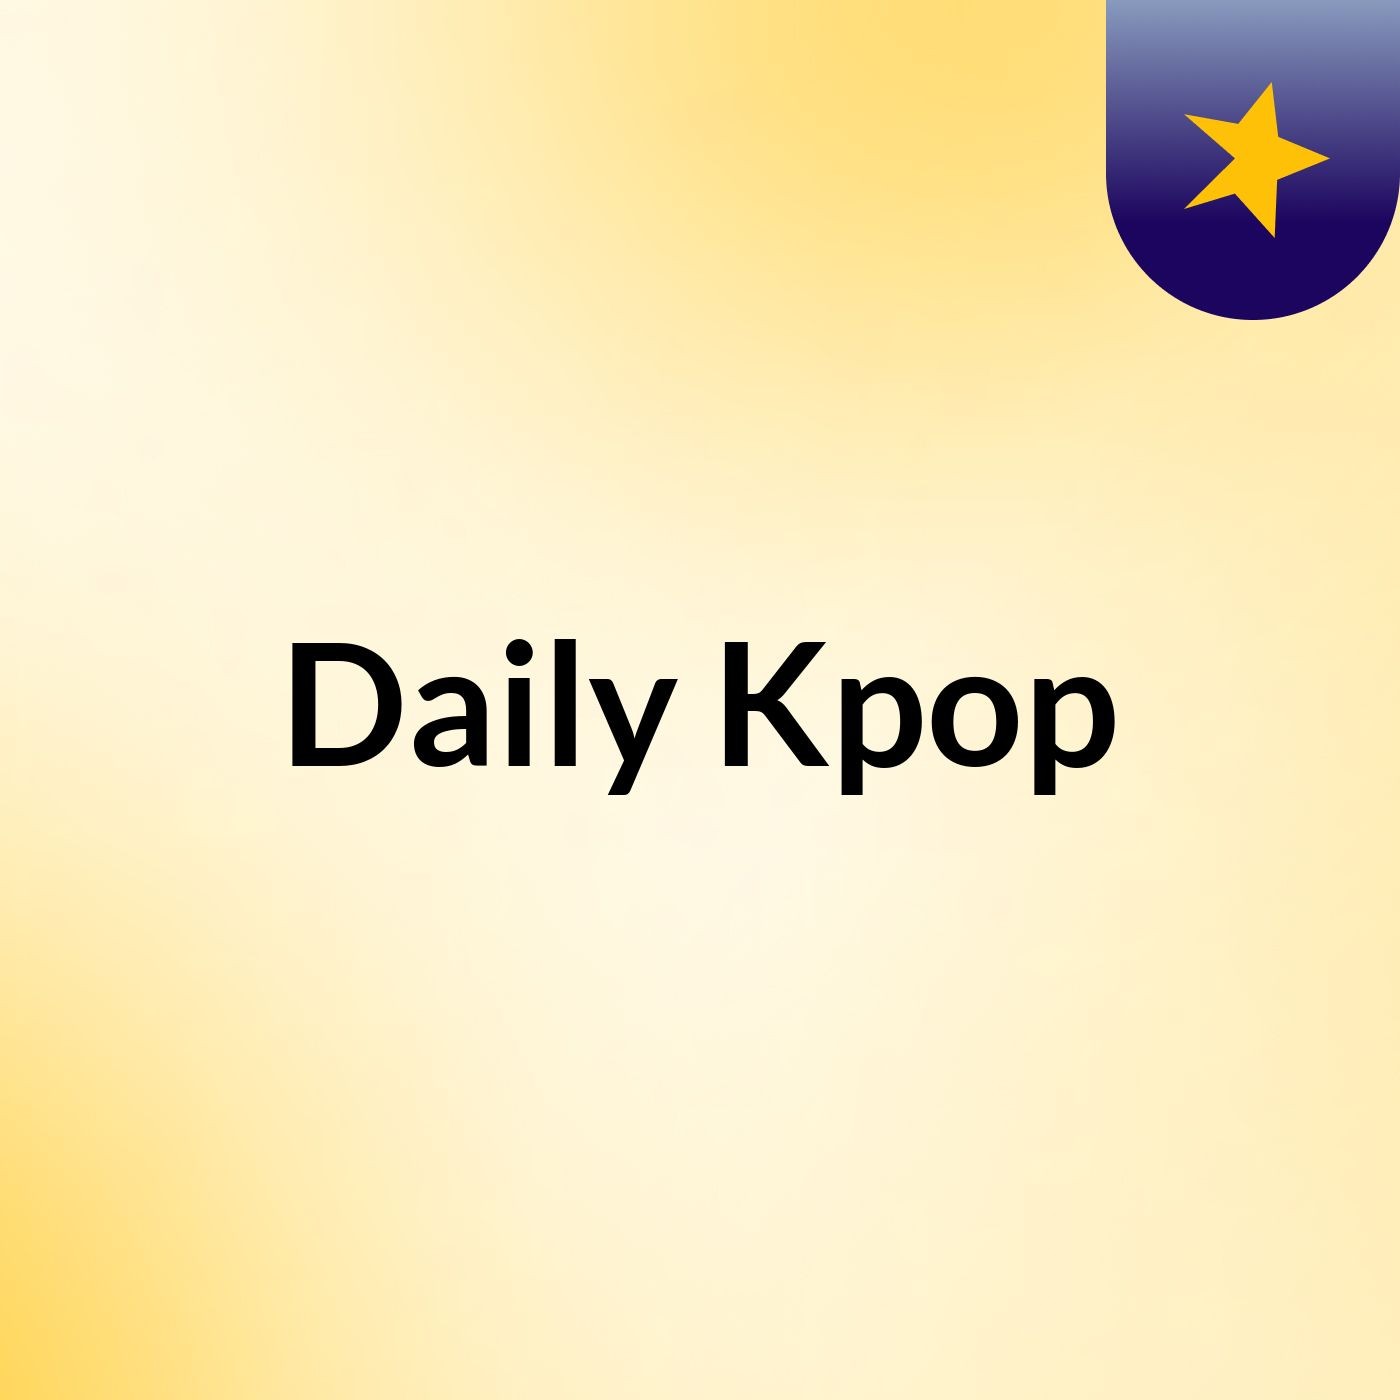 Episode 3 - Daily Kpop